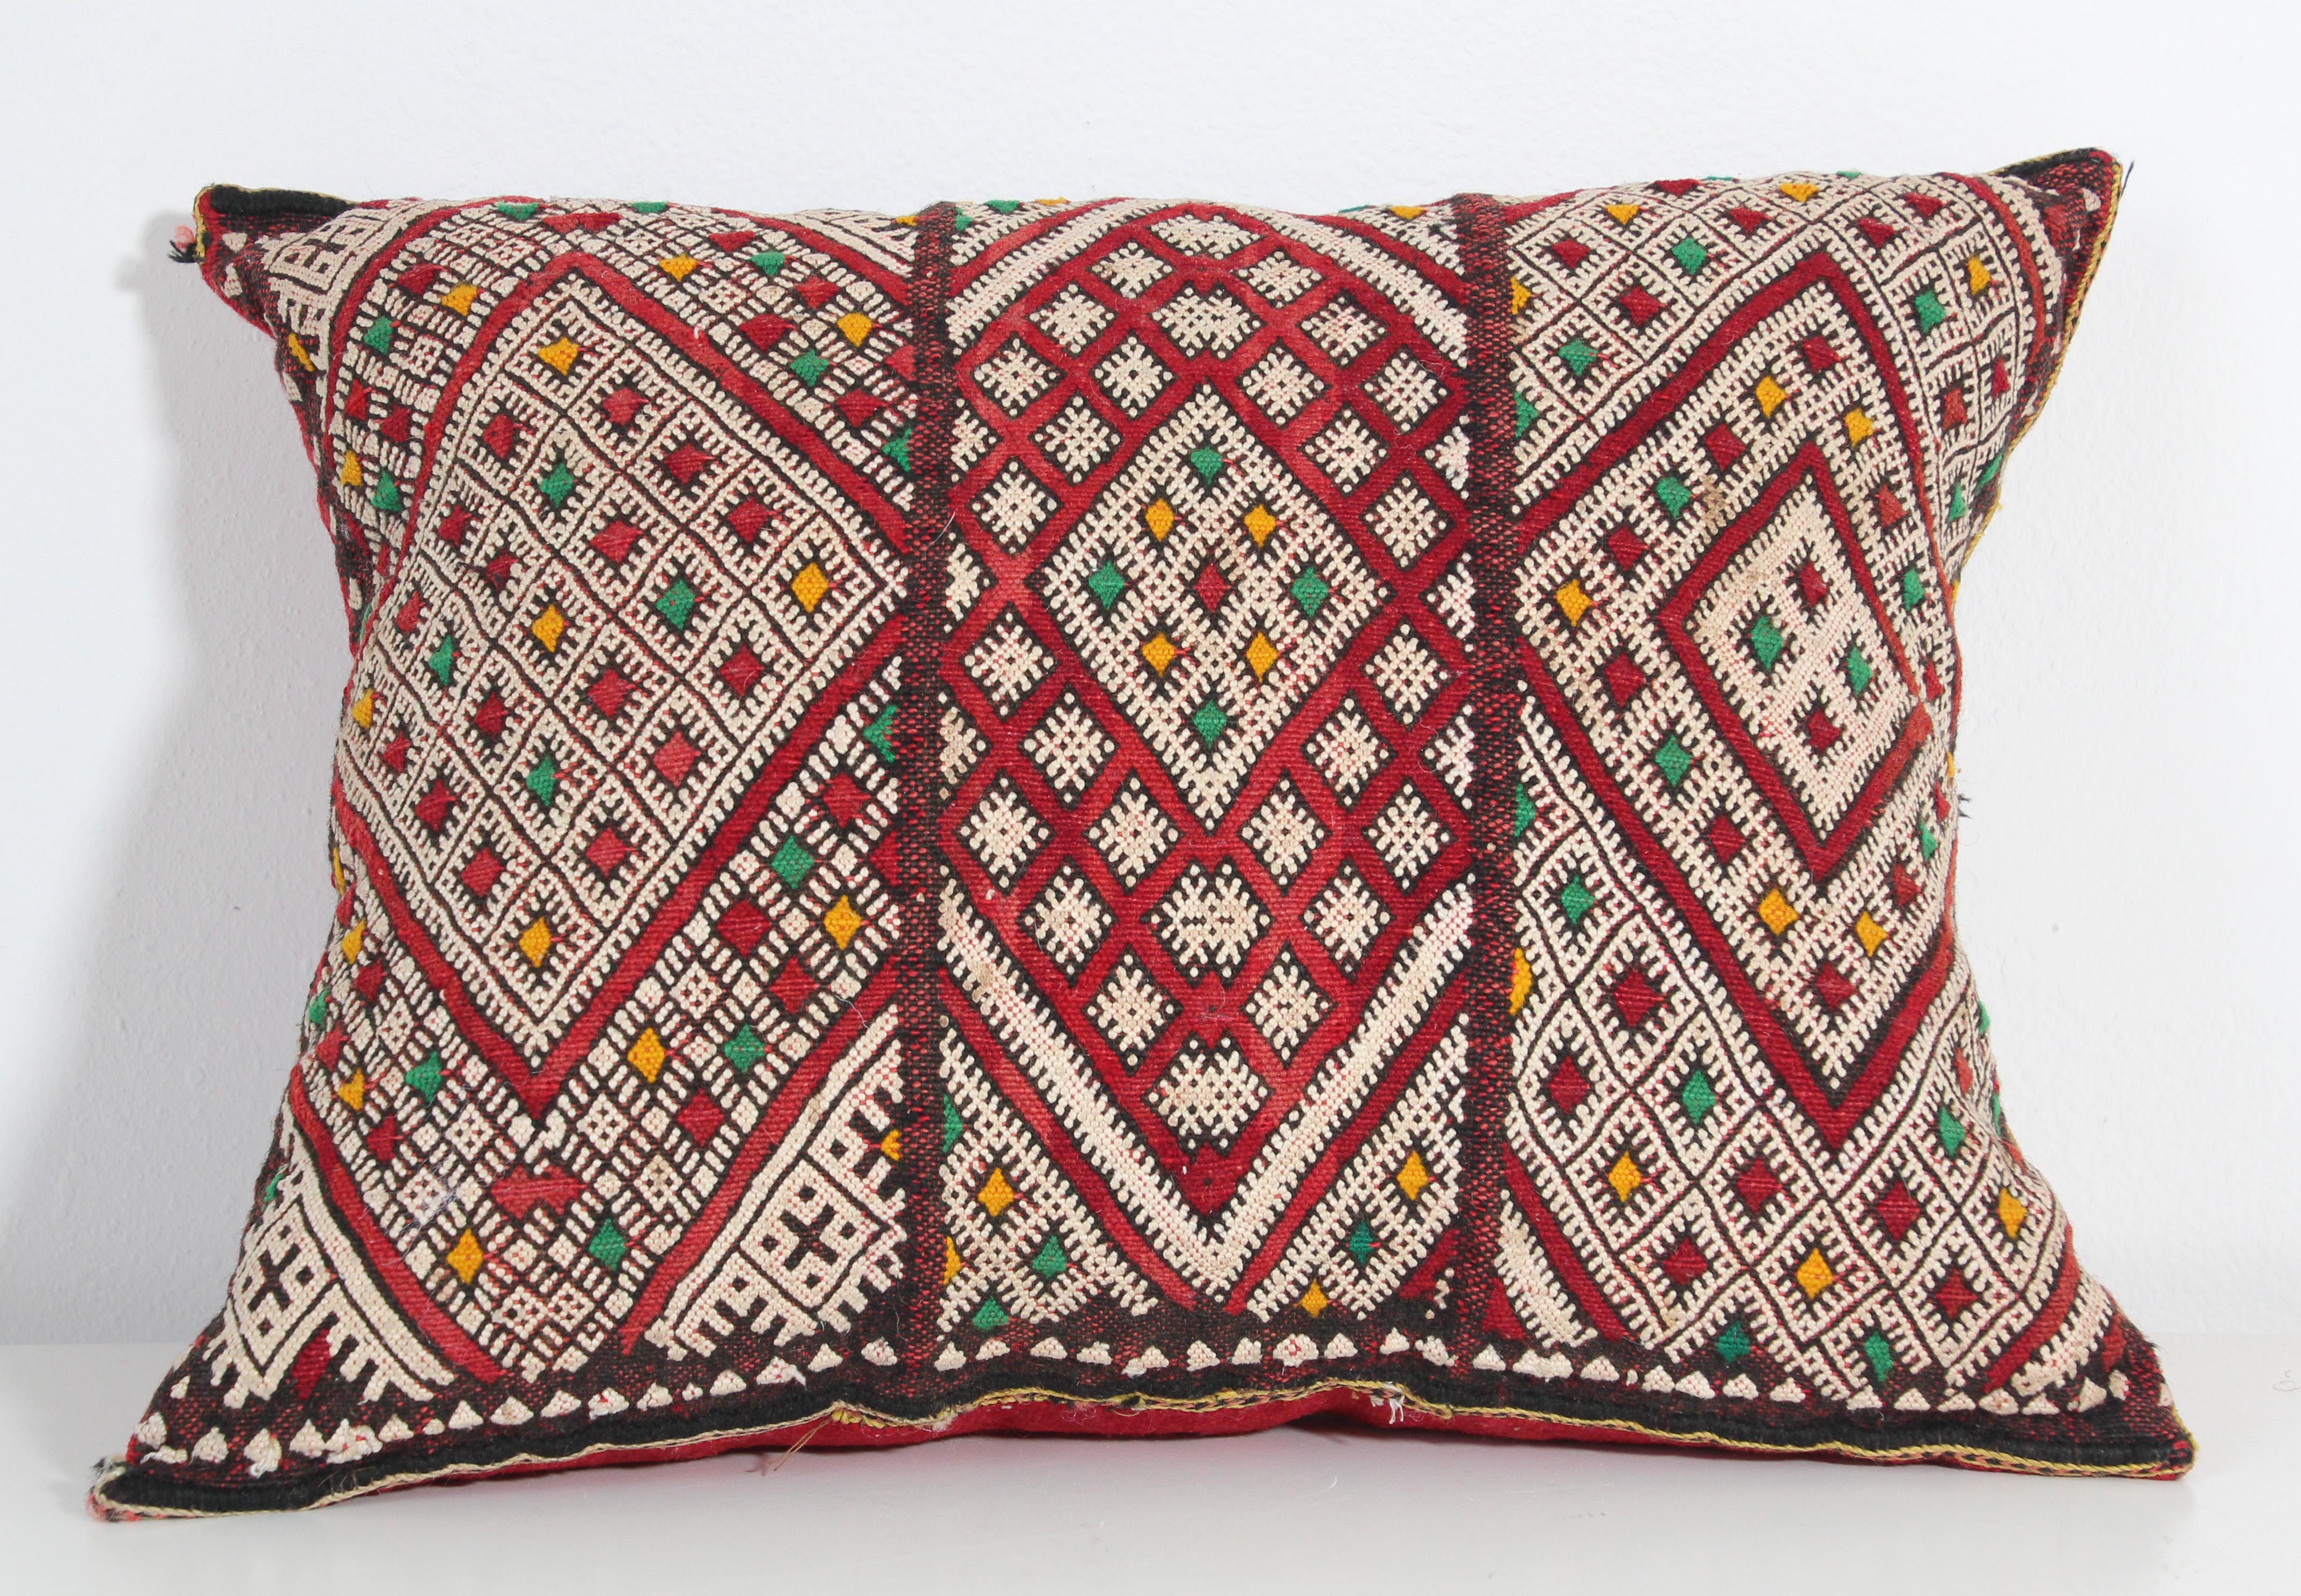 Moroccan Berber handwoven tribal throw pillow made from a vintage rug.
The front and the back are made from a different rug, front is more elaborate and back is more plain.
Geometric African tribal designs in red, white and black and some green